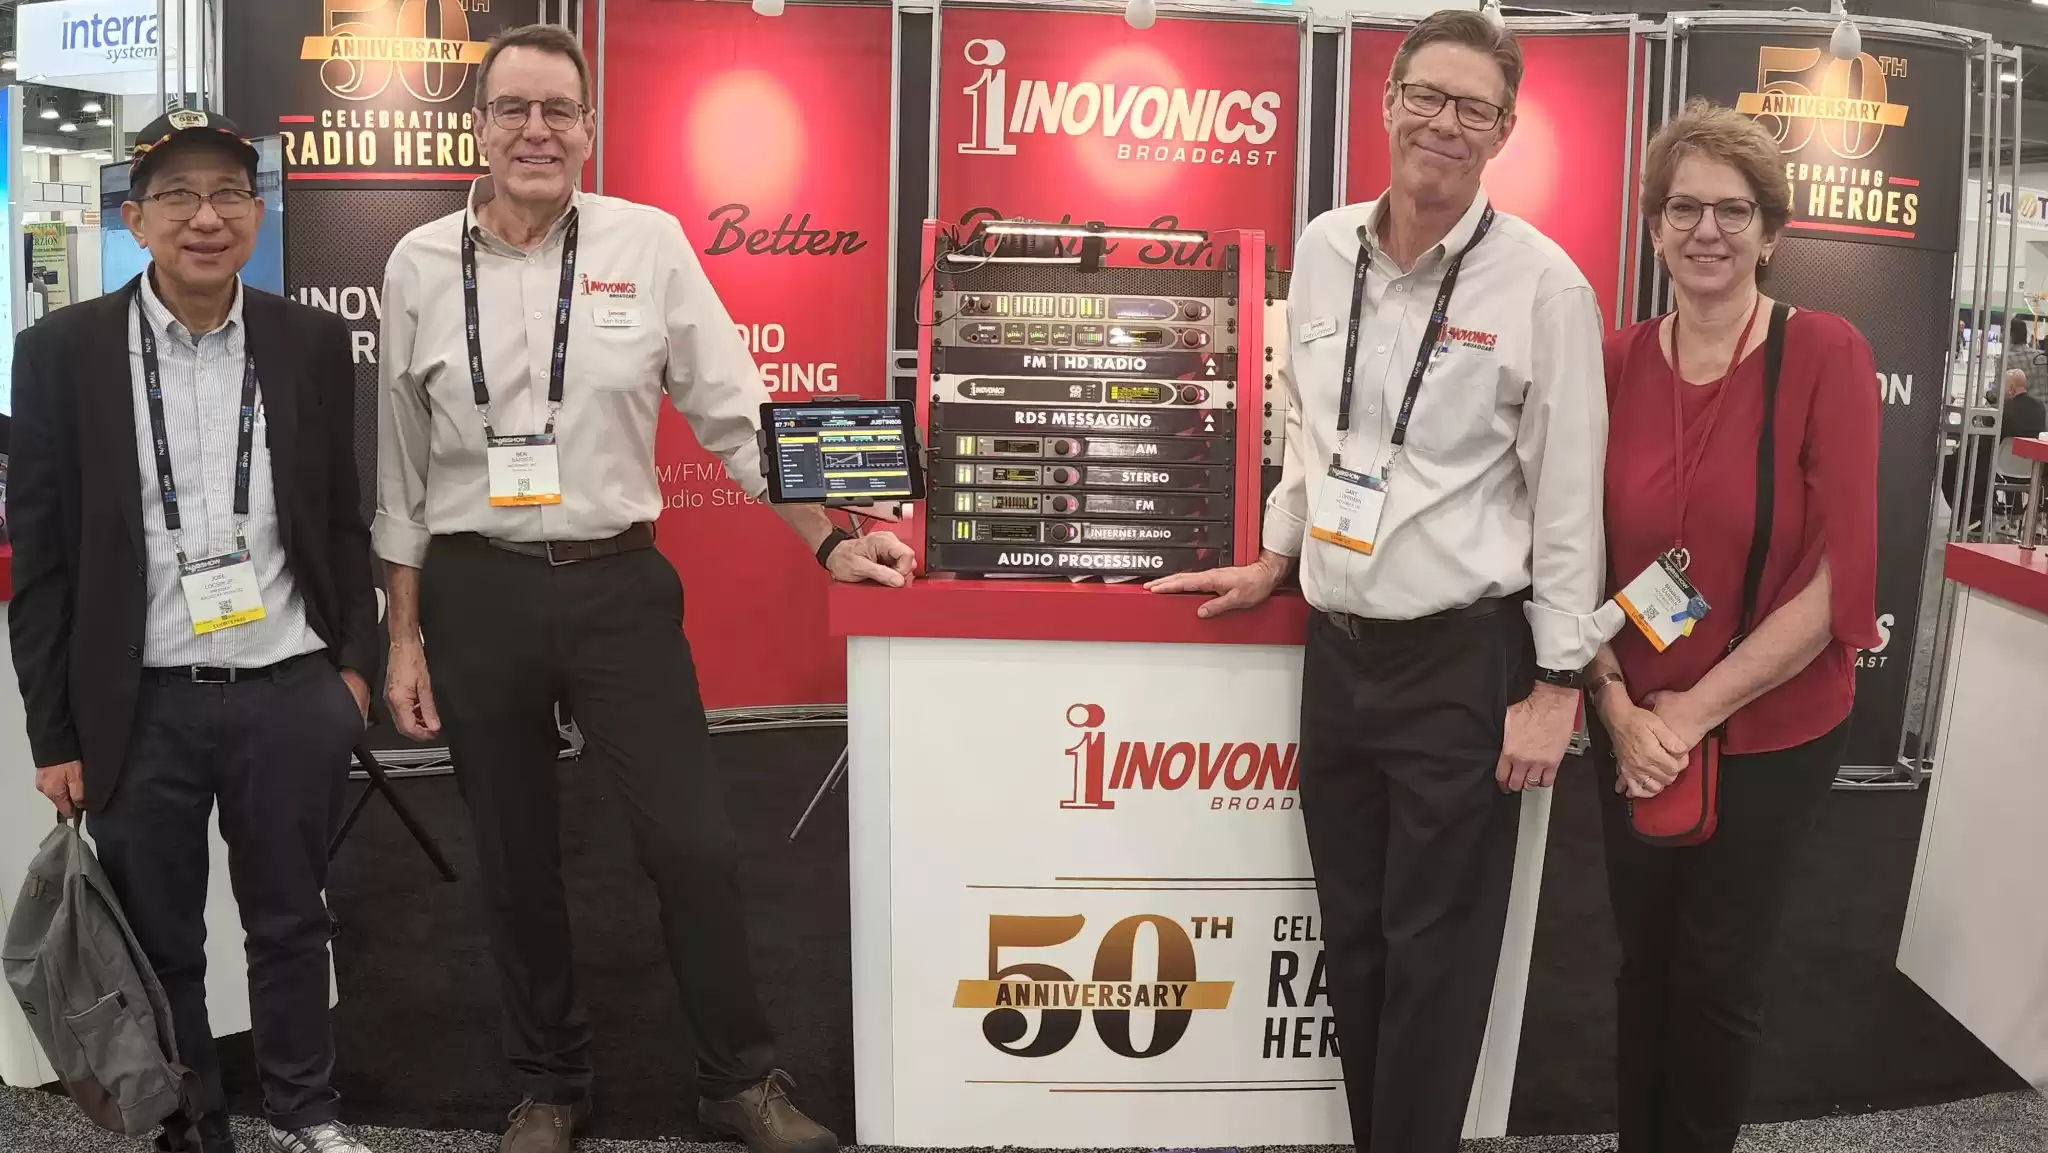 Mr. Jose Locsin (left) at the Inovonics Inc. Booth with Ben Barber, Gary Lhurman, and Sharon Barber